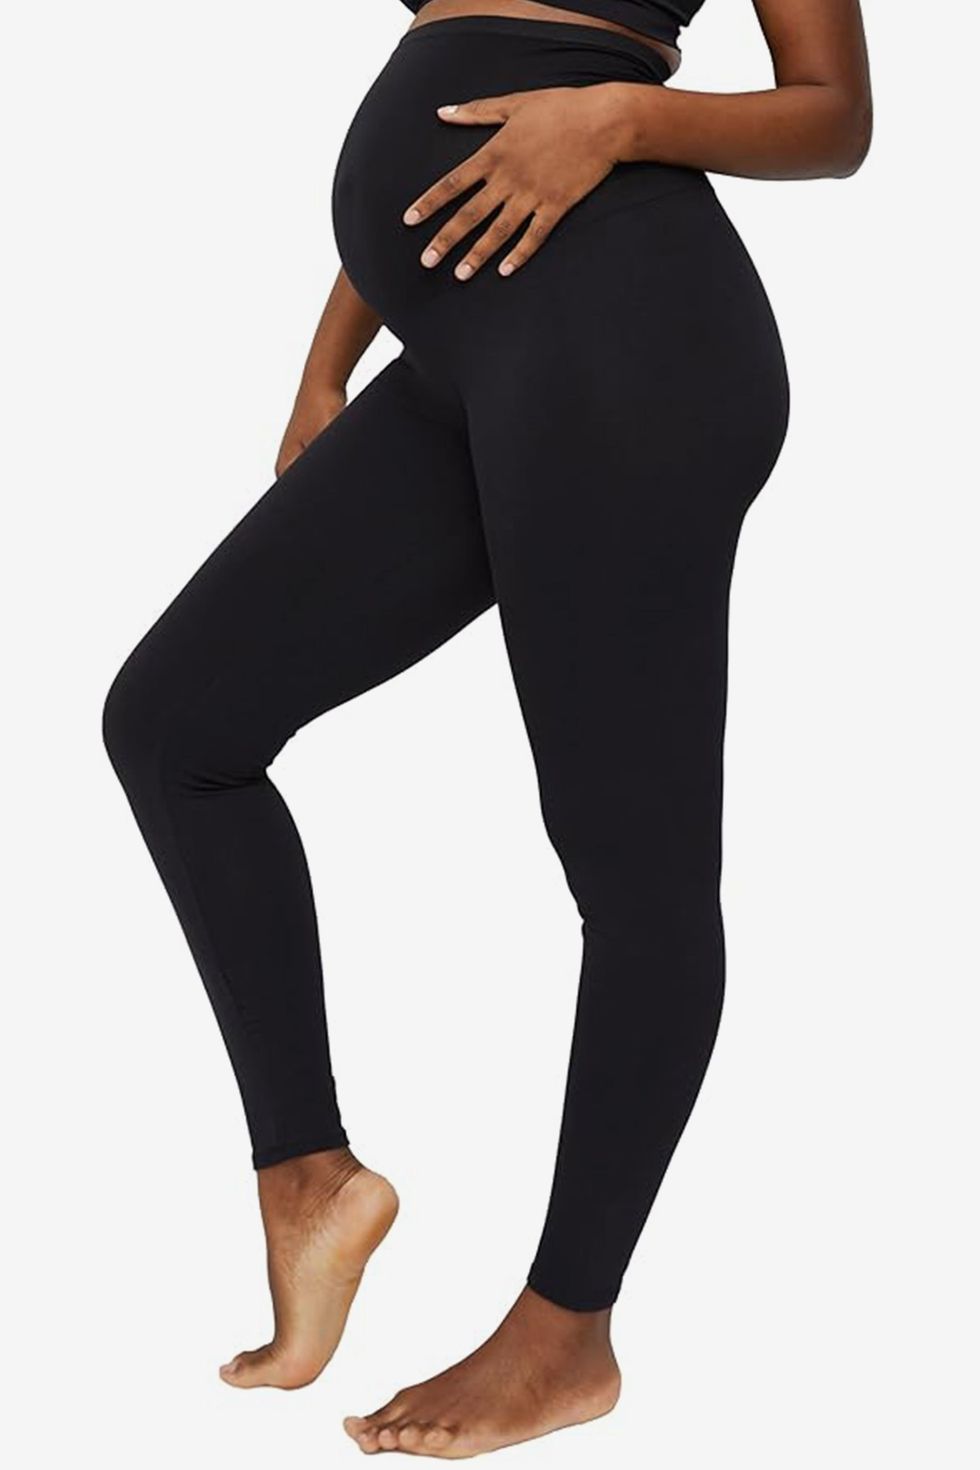 The Perfect Leggings To Flatter Your Belly, Lengthen Your Legs